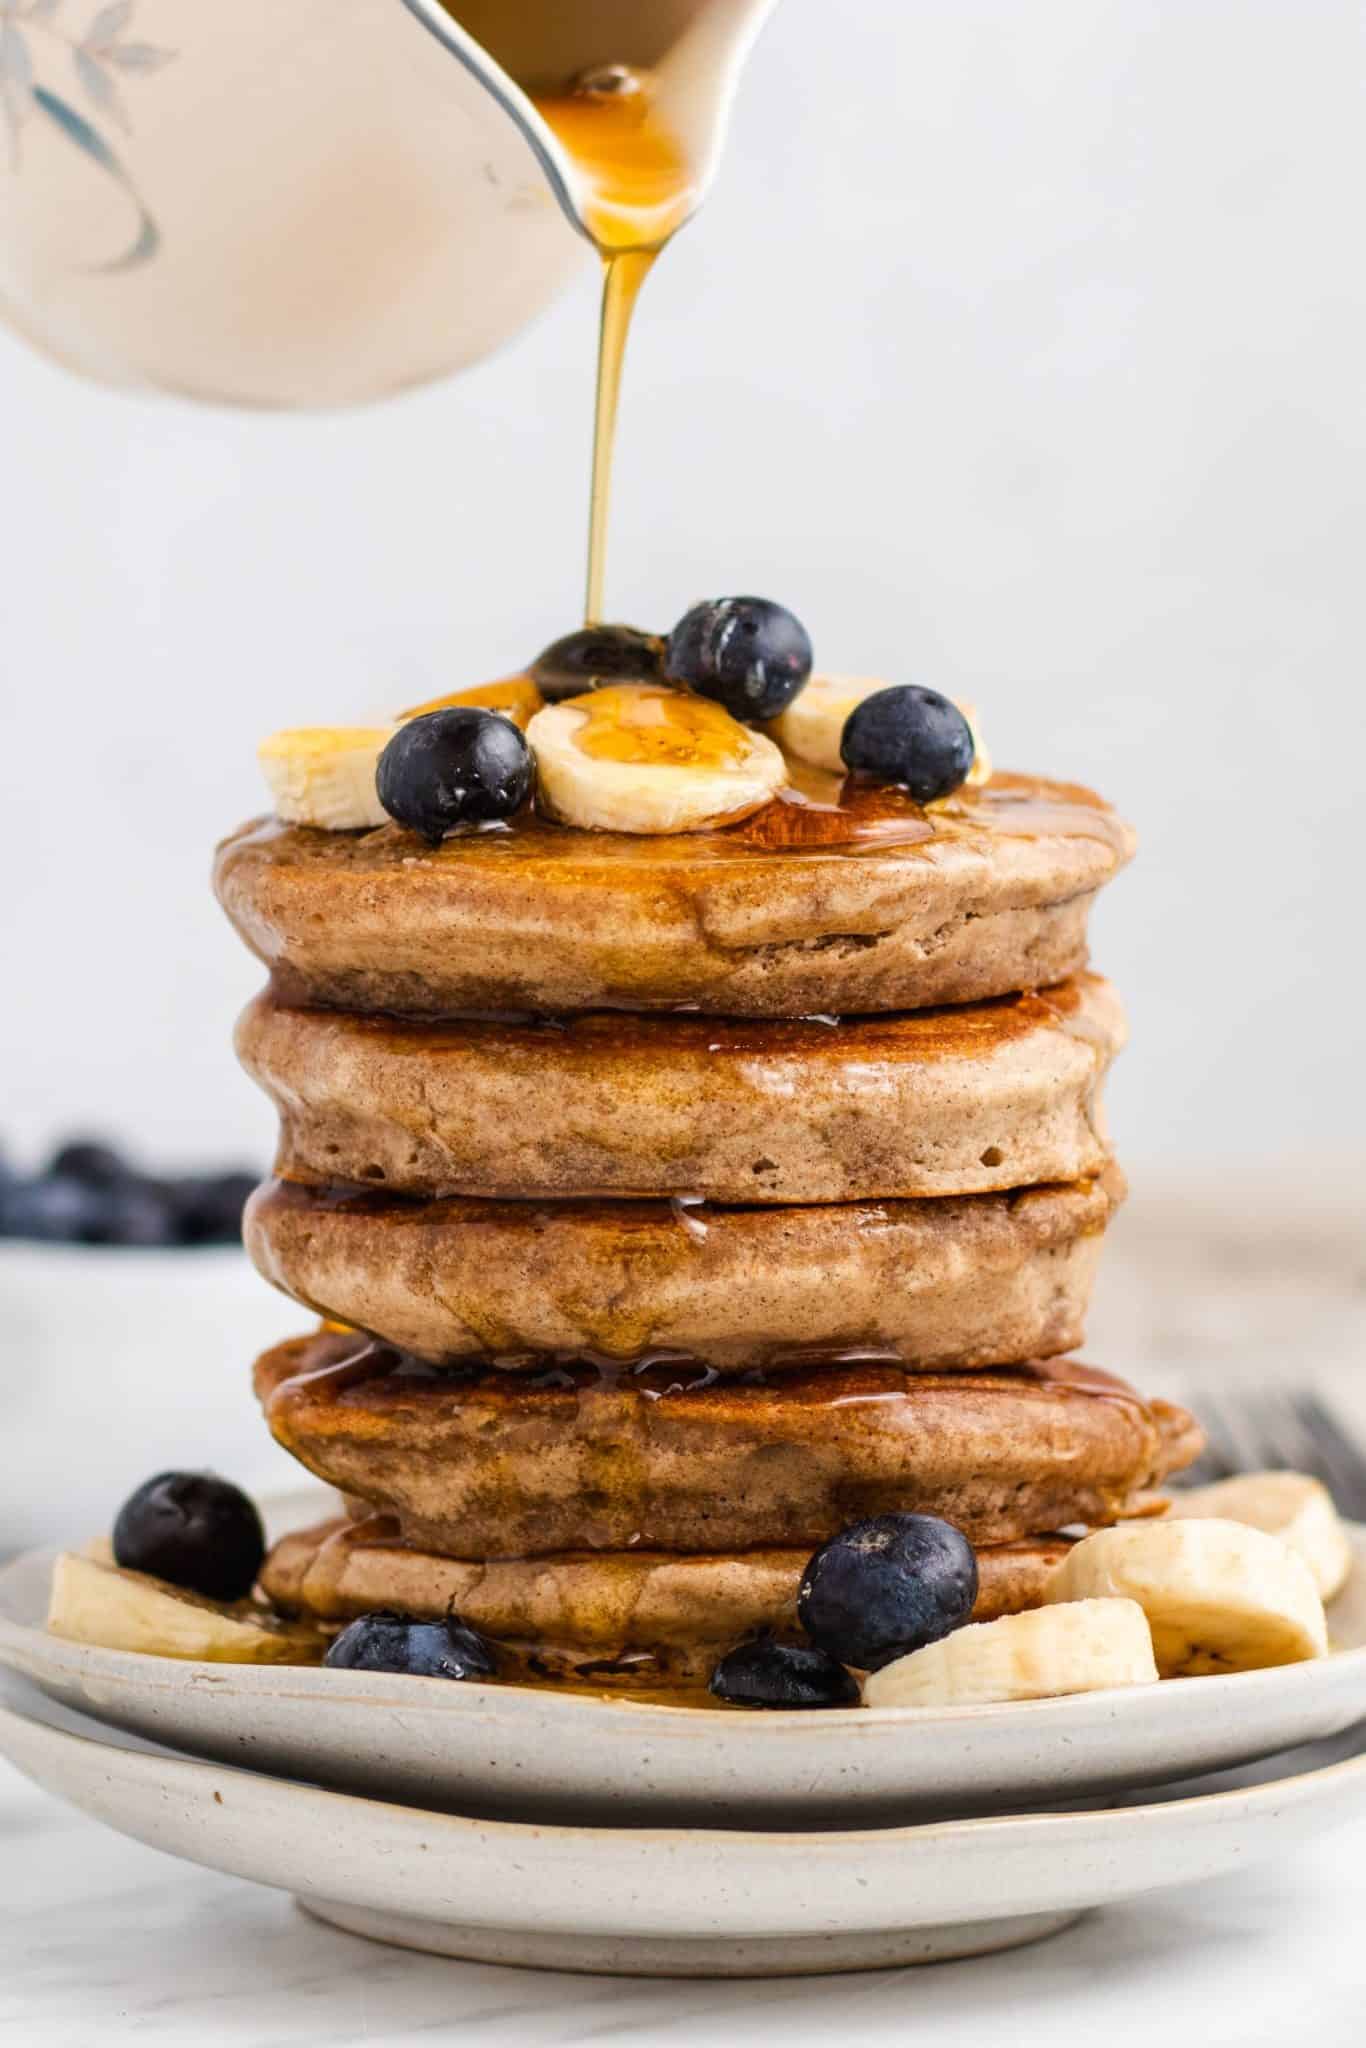 a staple of buckwheat pancakes served with blueberries and hoeny